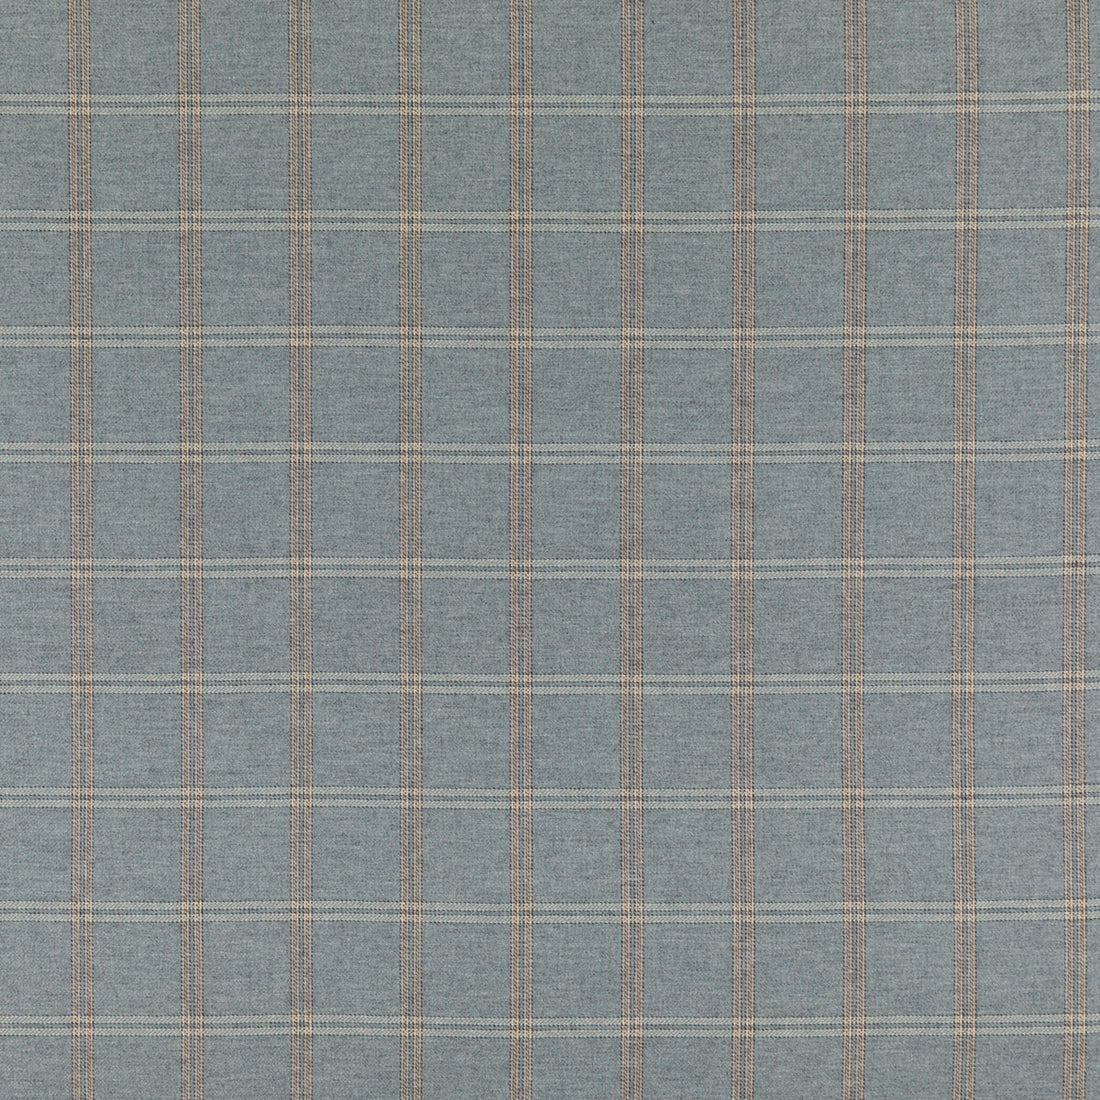 Walton fabric in soft teal color - pattern FD775.R41.0 - by Mulberry in the Modern Country collection